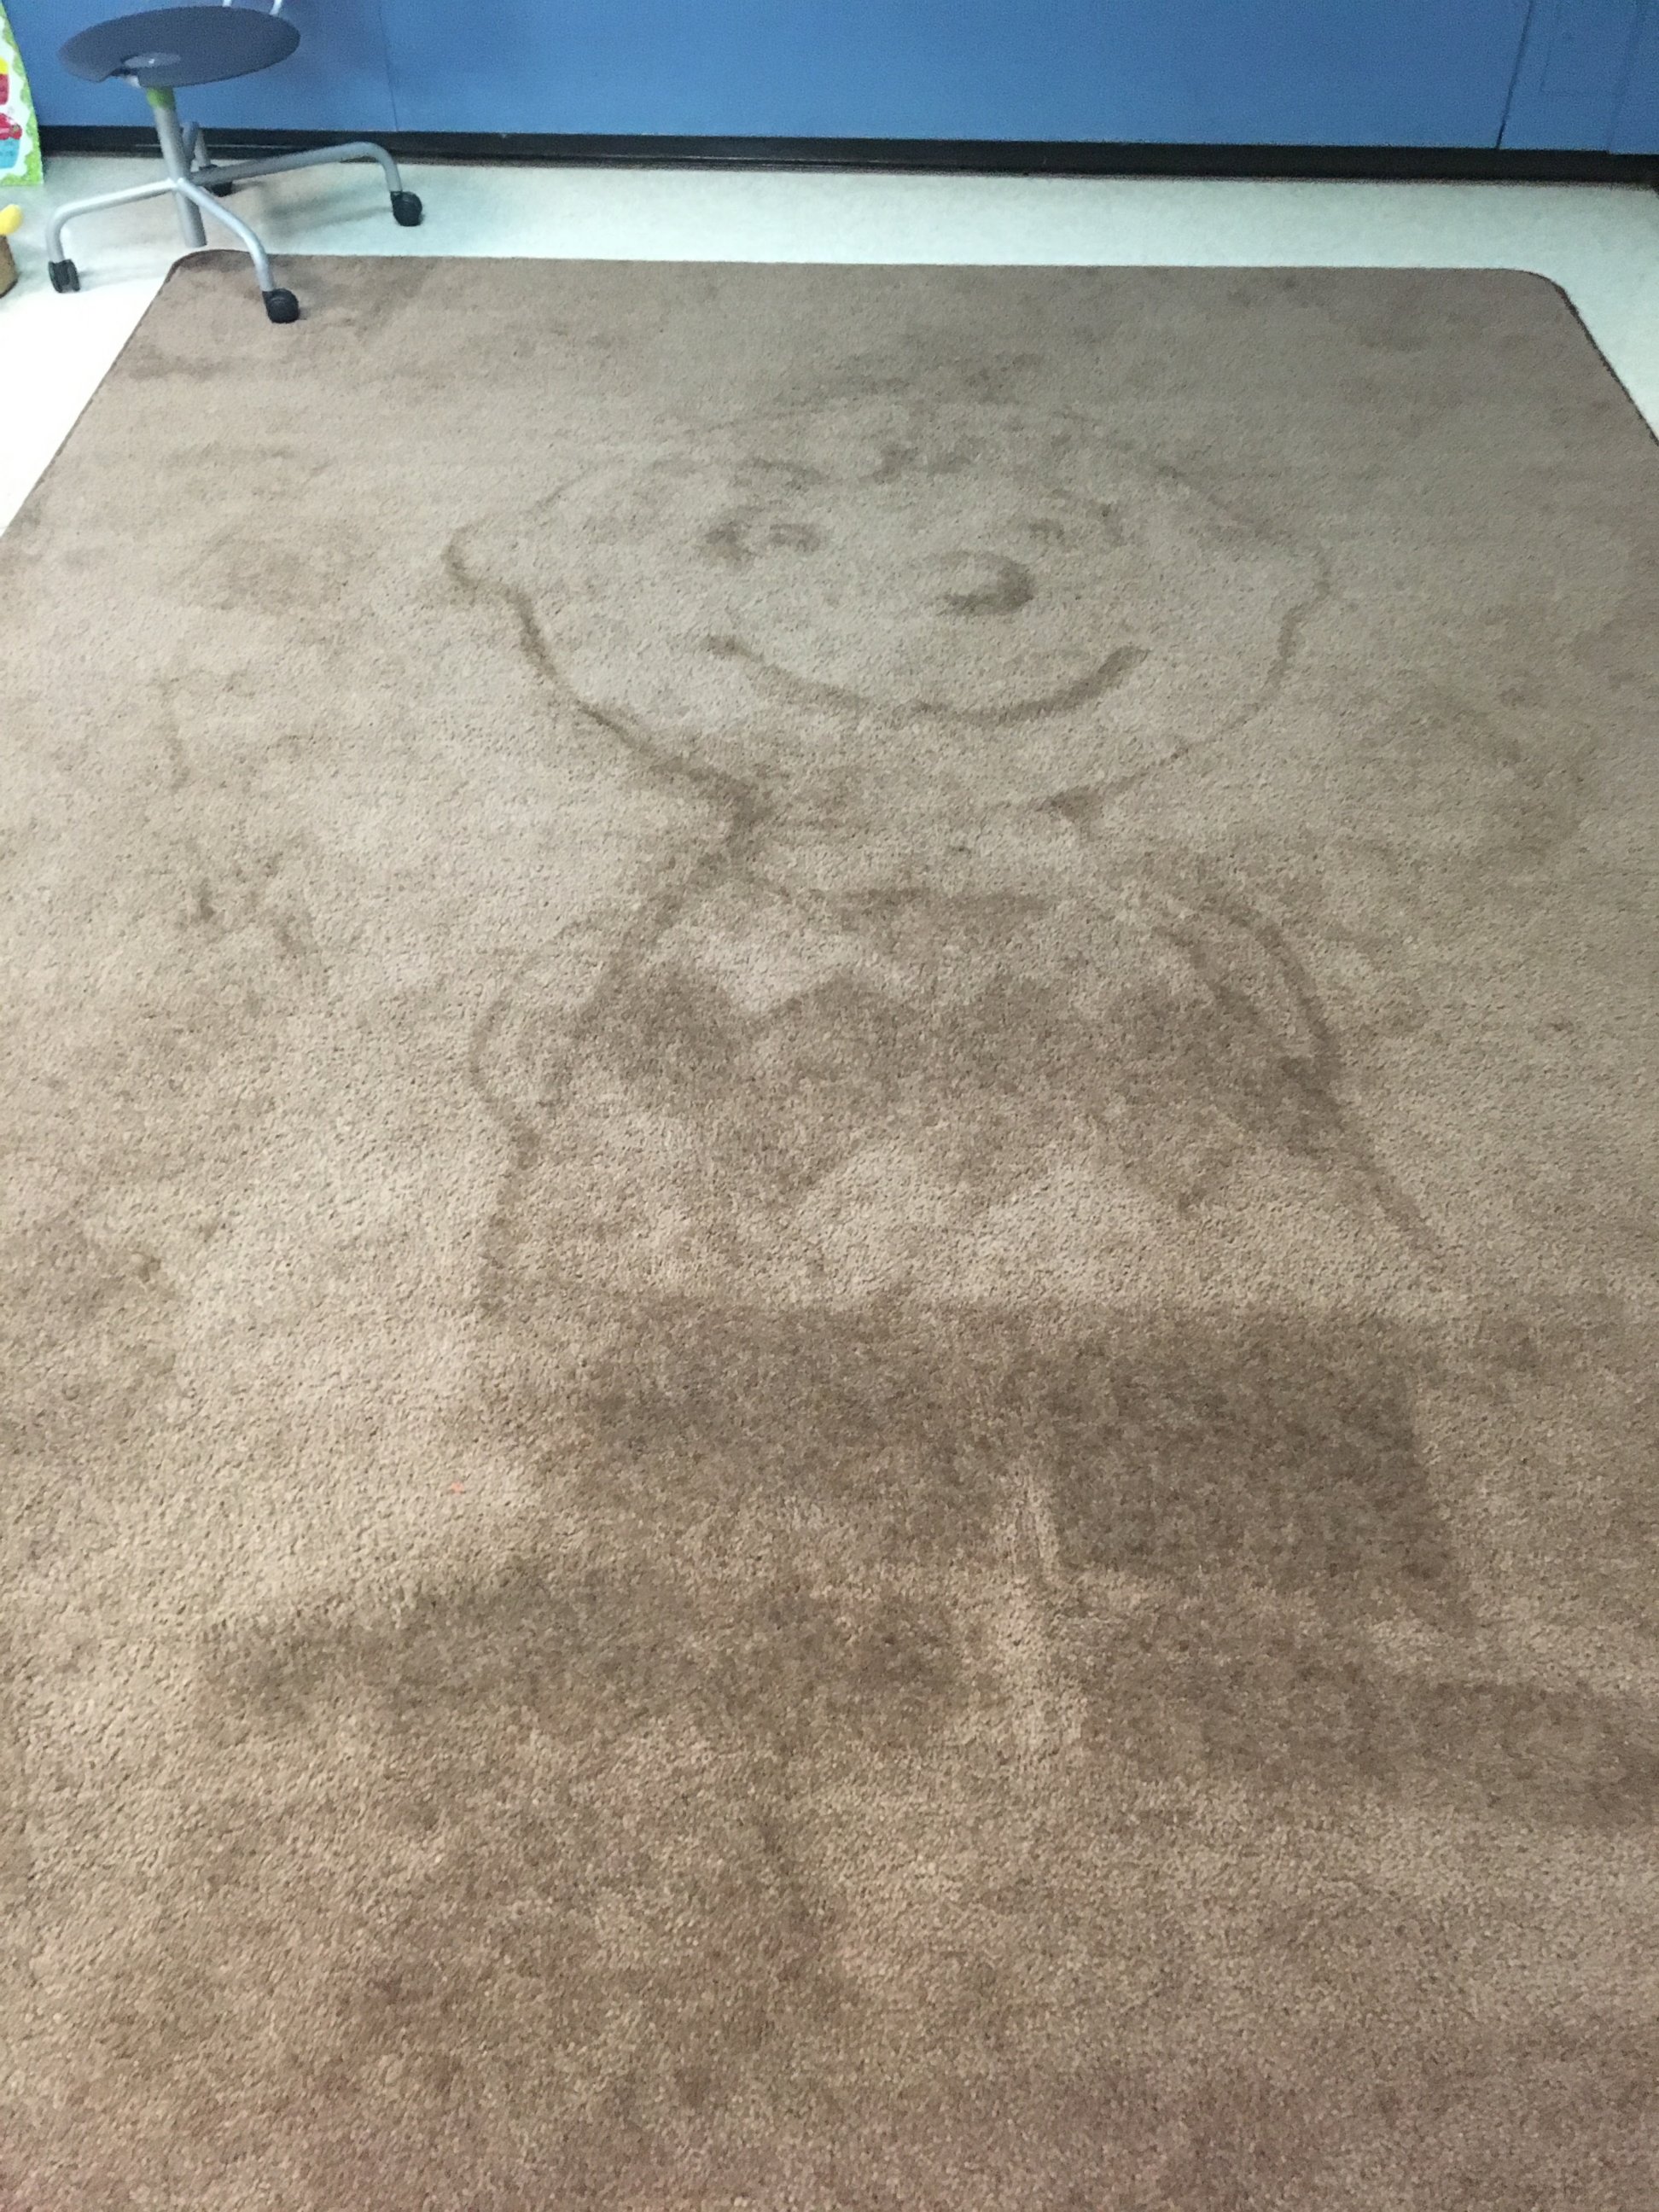 PHOTO: School janitor Ron Munsey vacuums artistic designs into classroom rugs as daily surprise for kids.